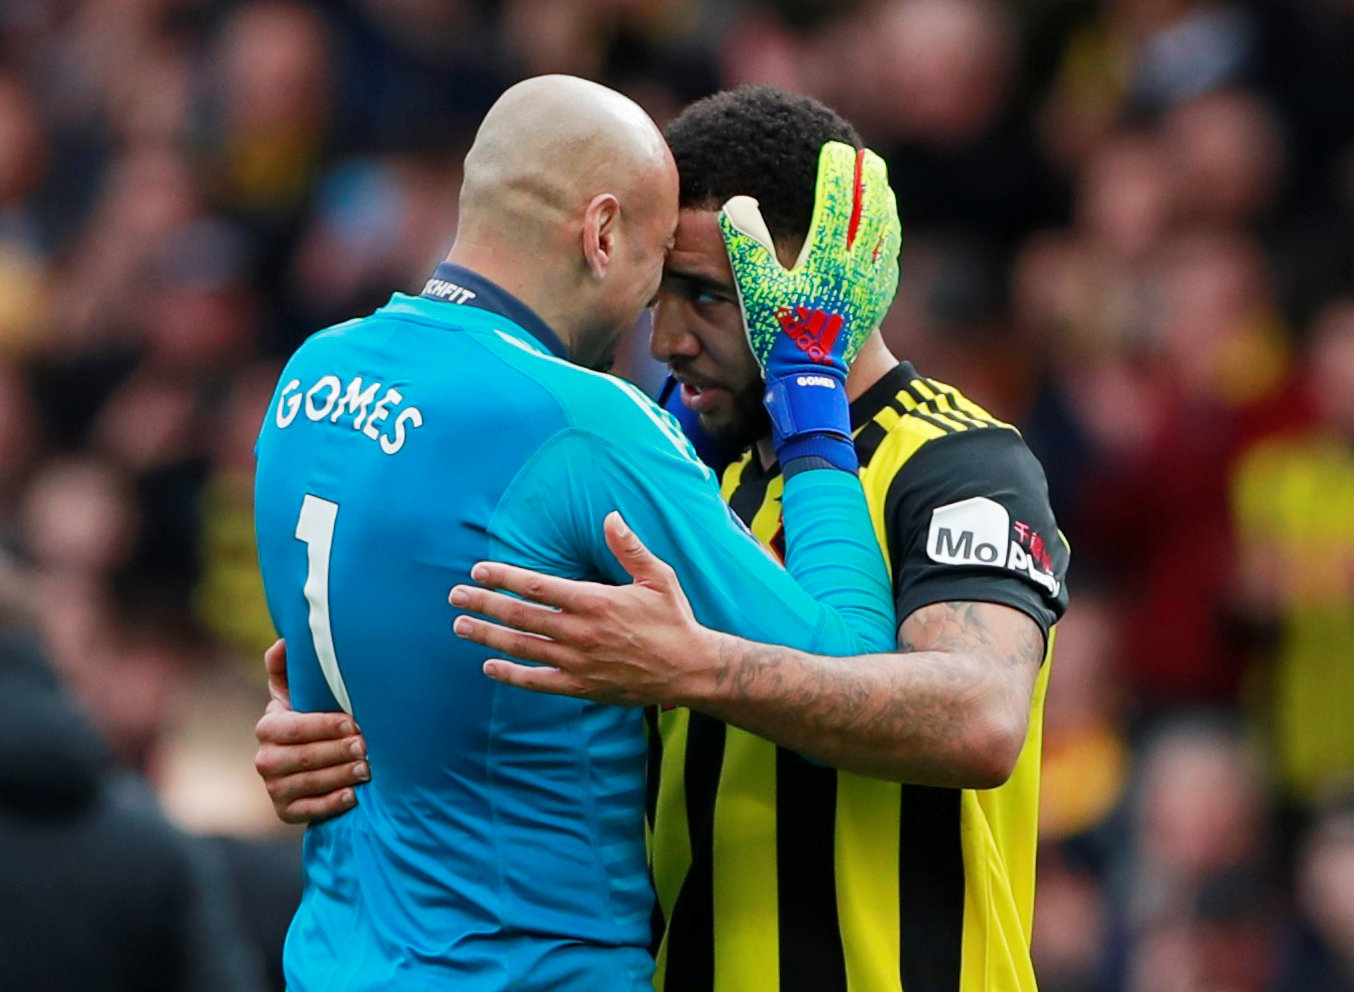 On this day in pictures: Watford beat Crystal Palace to reach FA Cup semi-final